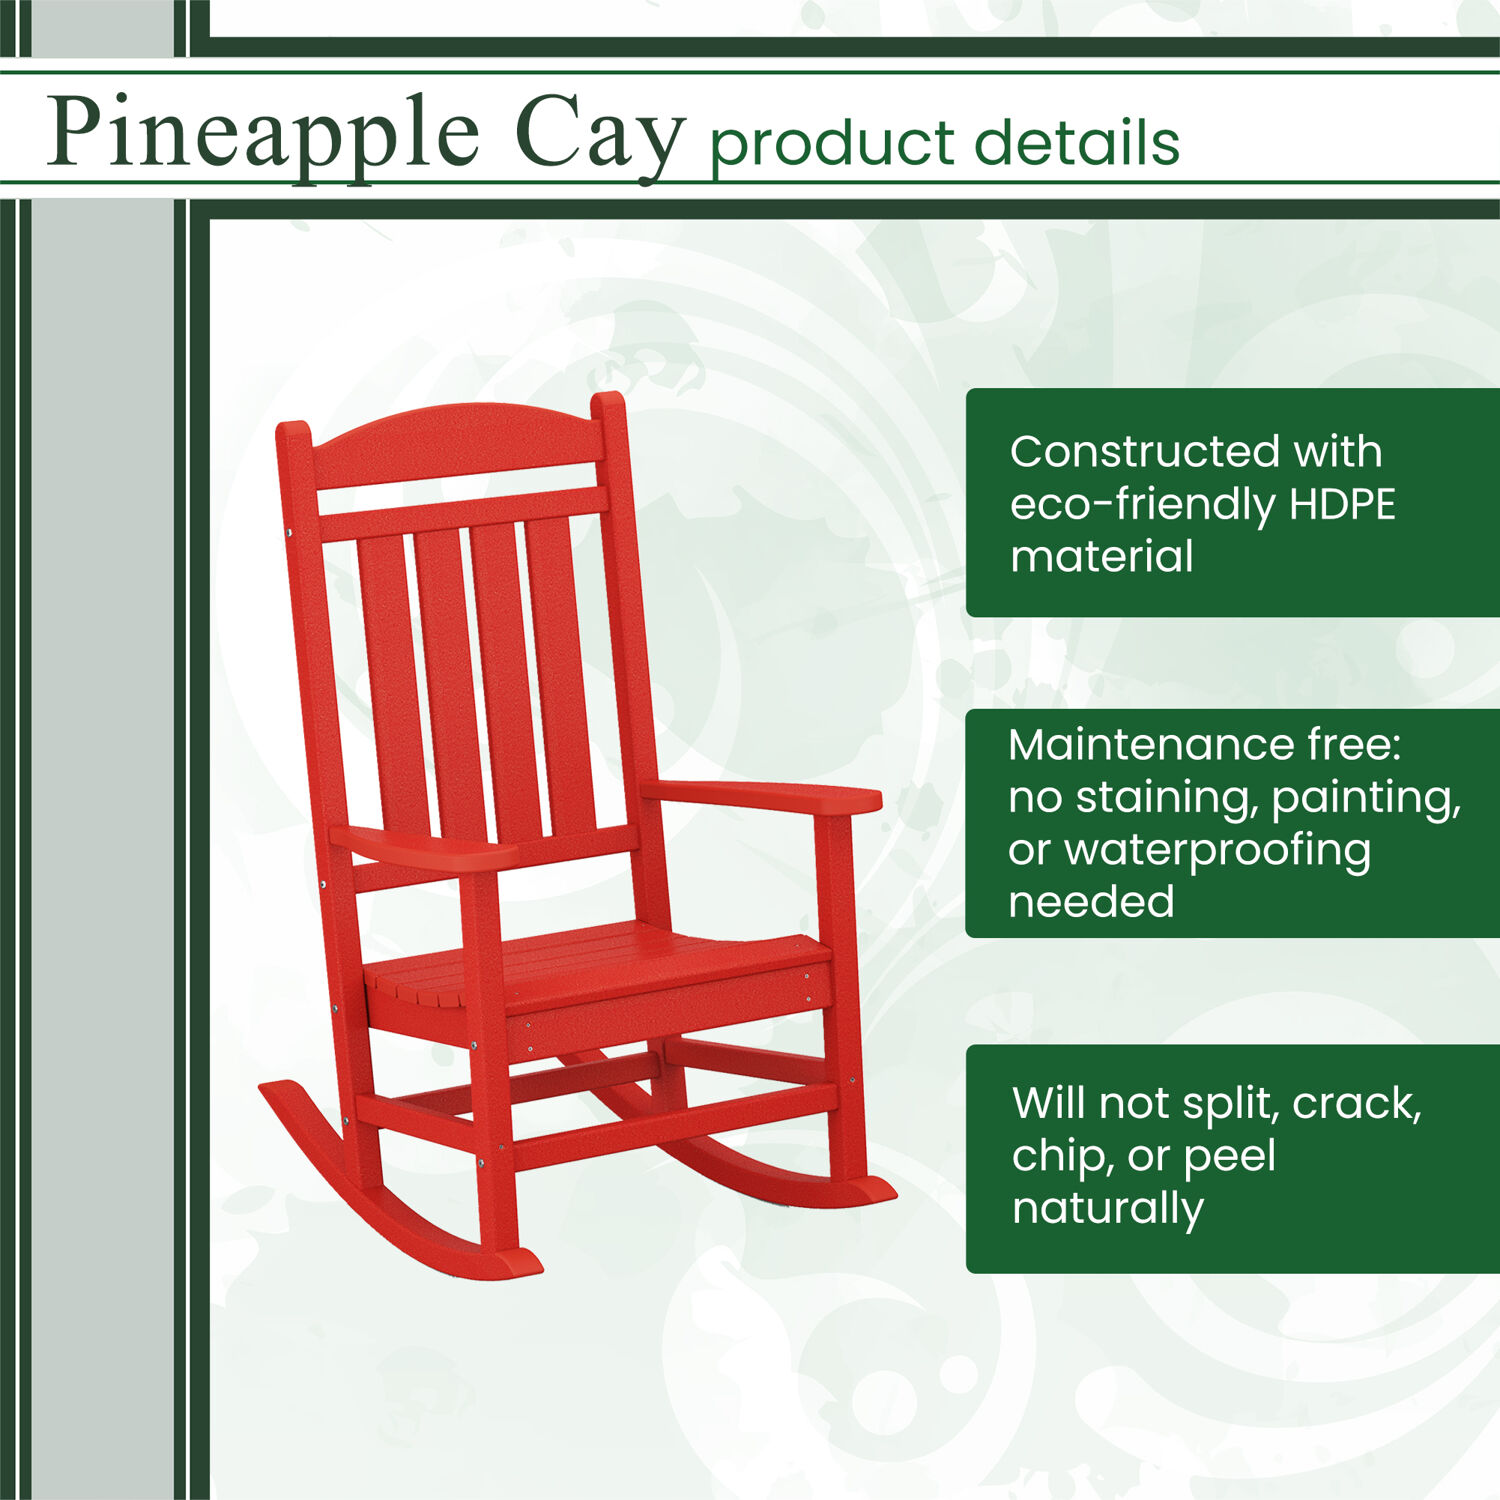 Hanover Pineapple Cay All-Weather Outdoor Patio Porch Rocker, Eco-Friendly, Recycled Material, - HVR100SR - image 3 of 5